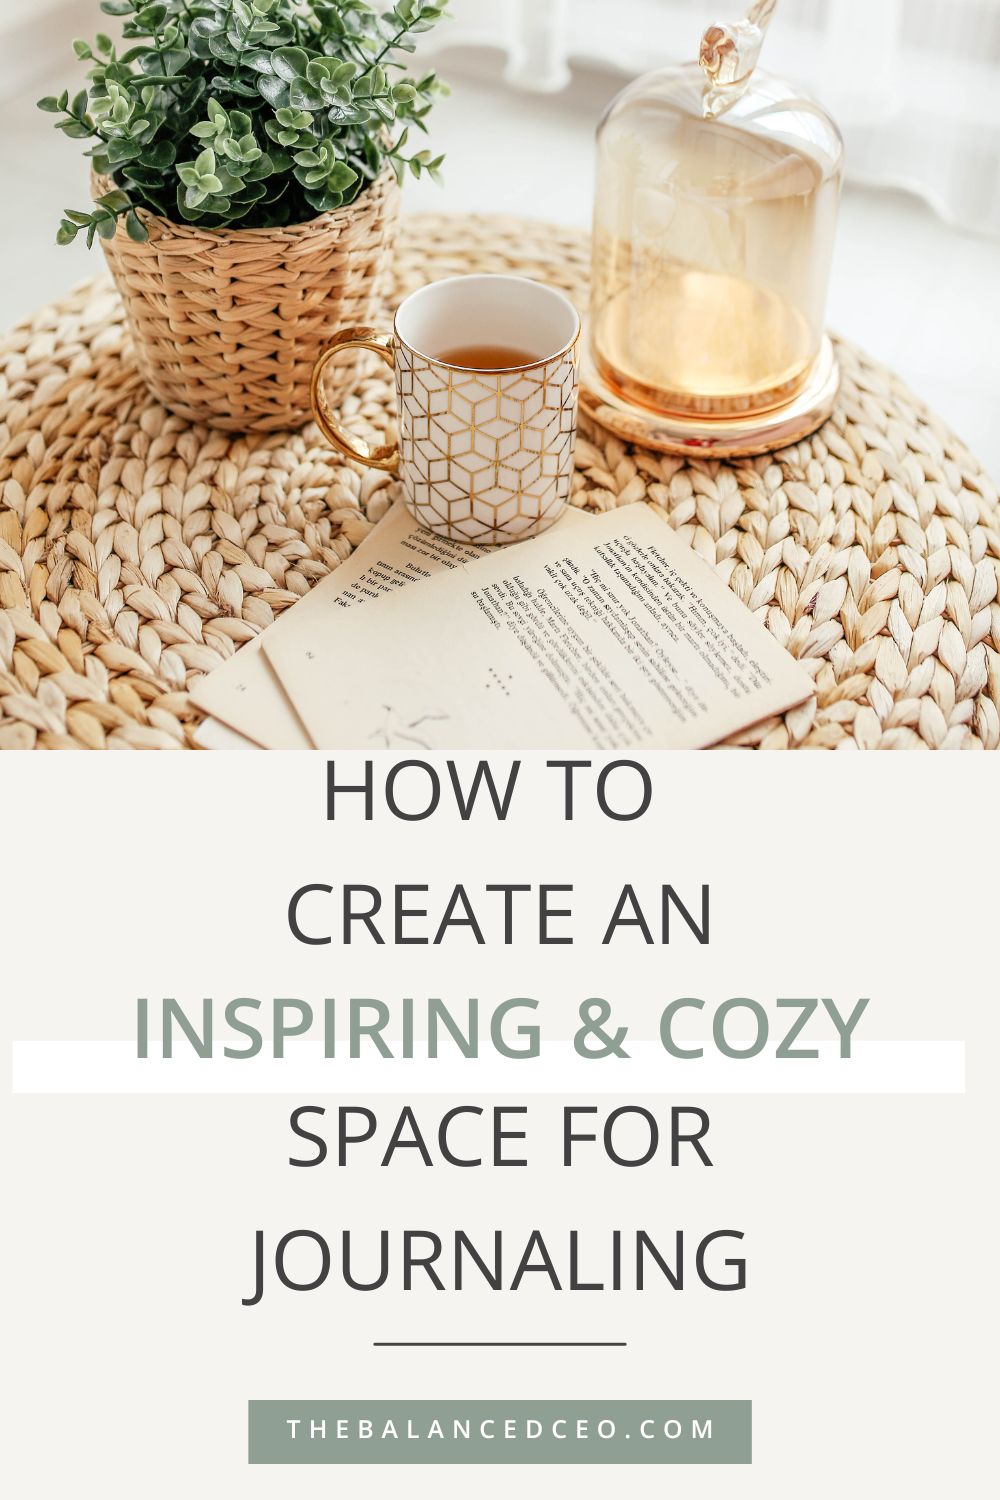 How to Create an Inspiring and Cozy Space for Journaling